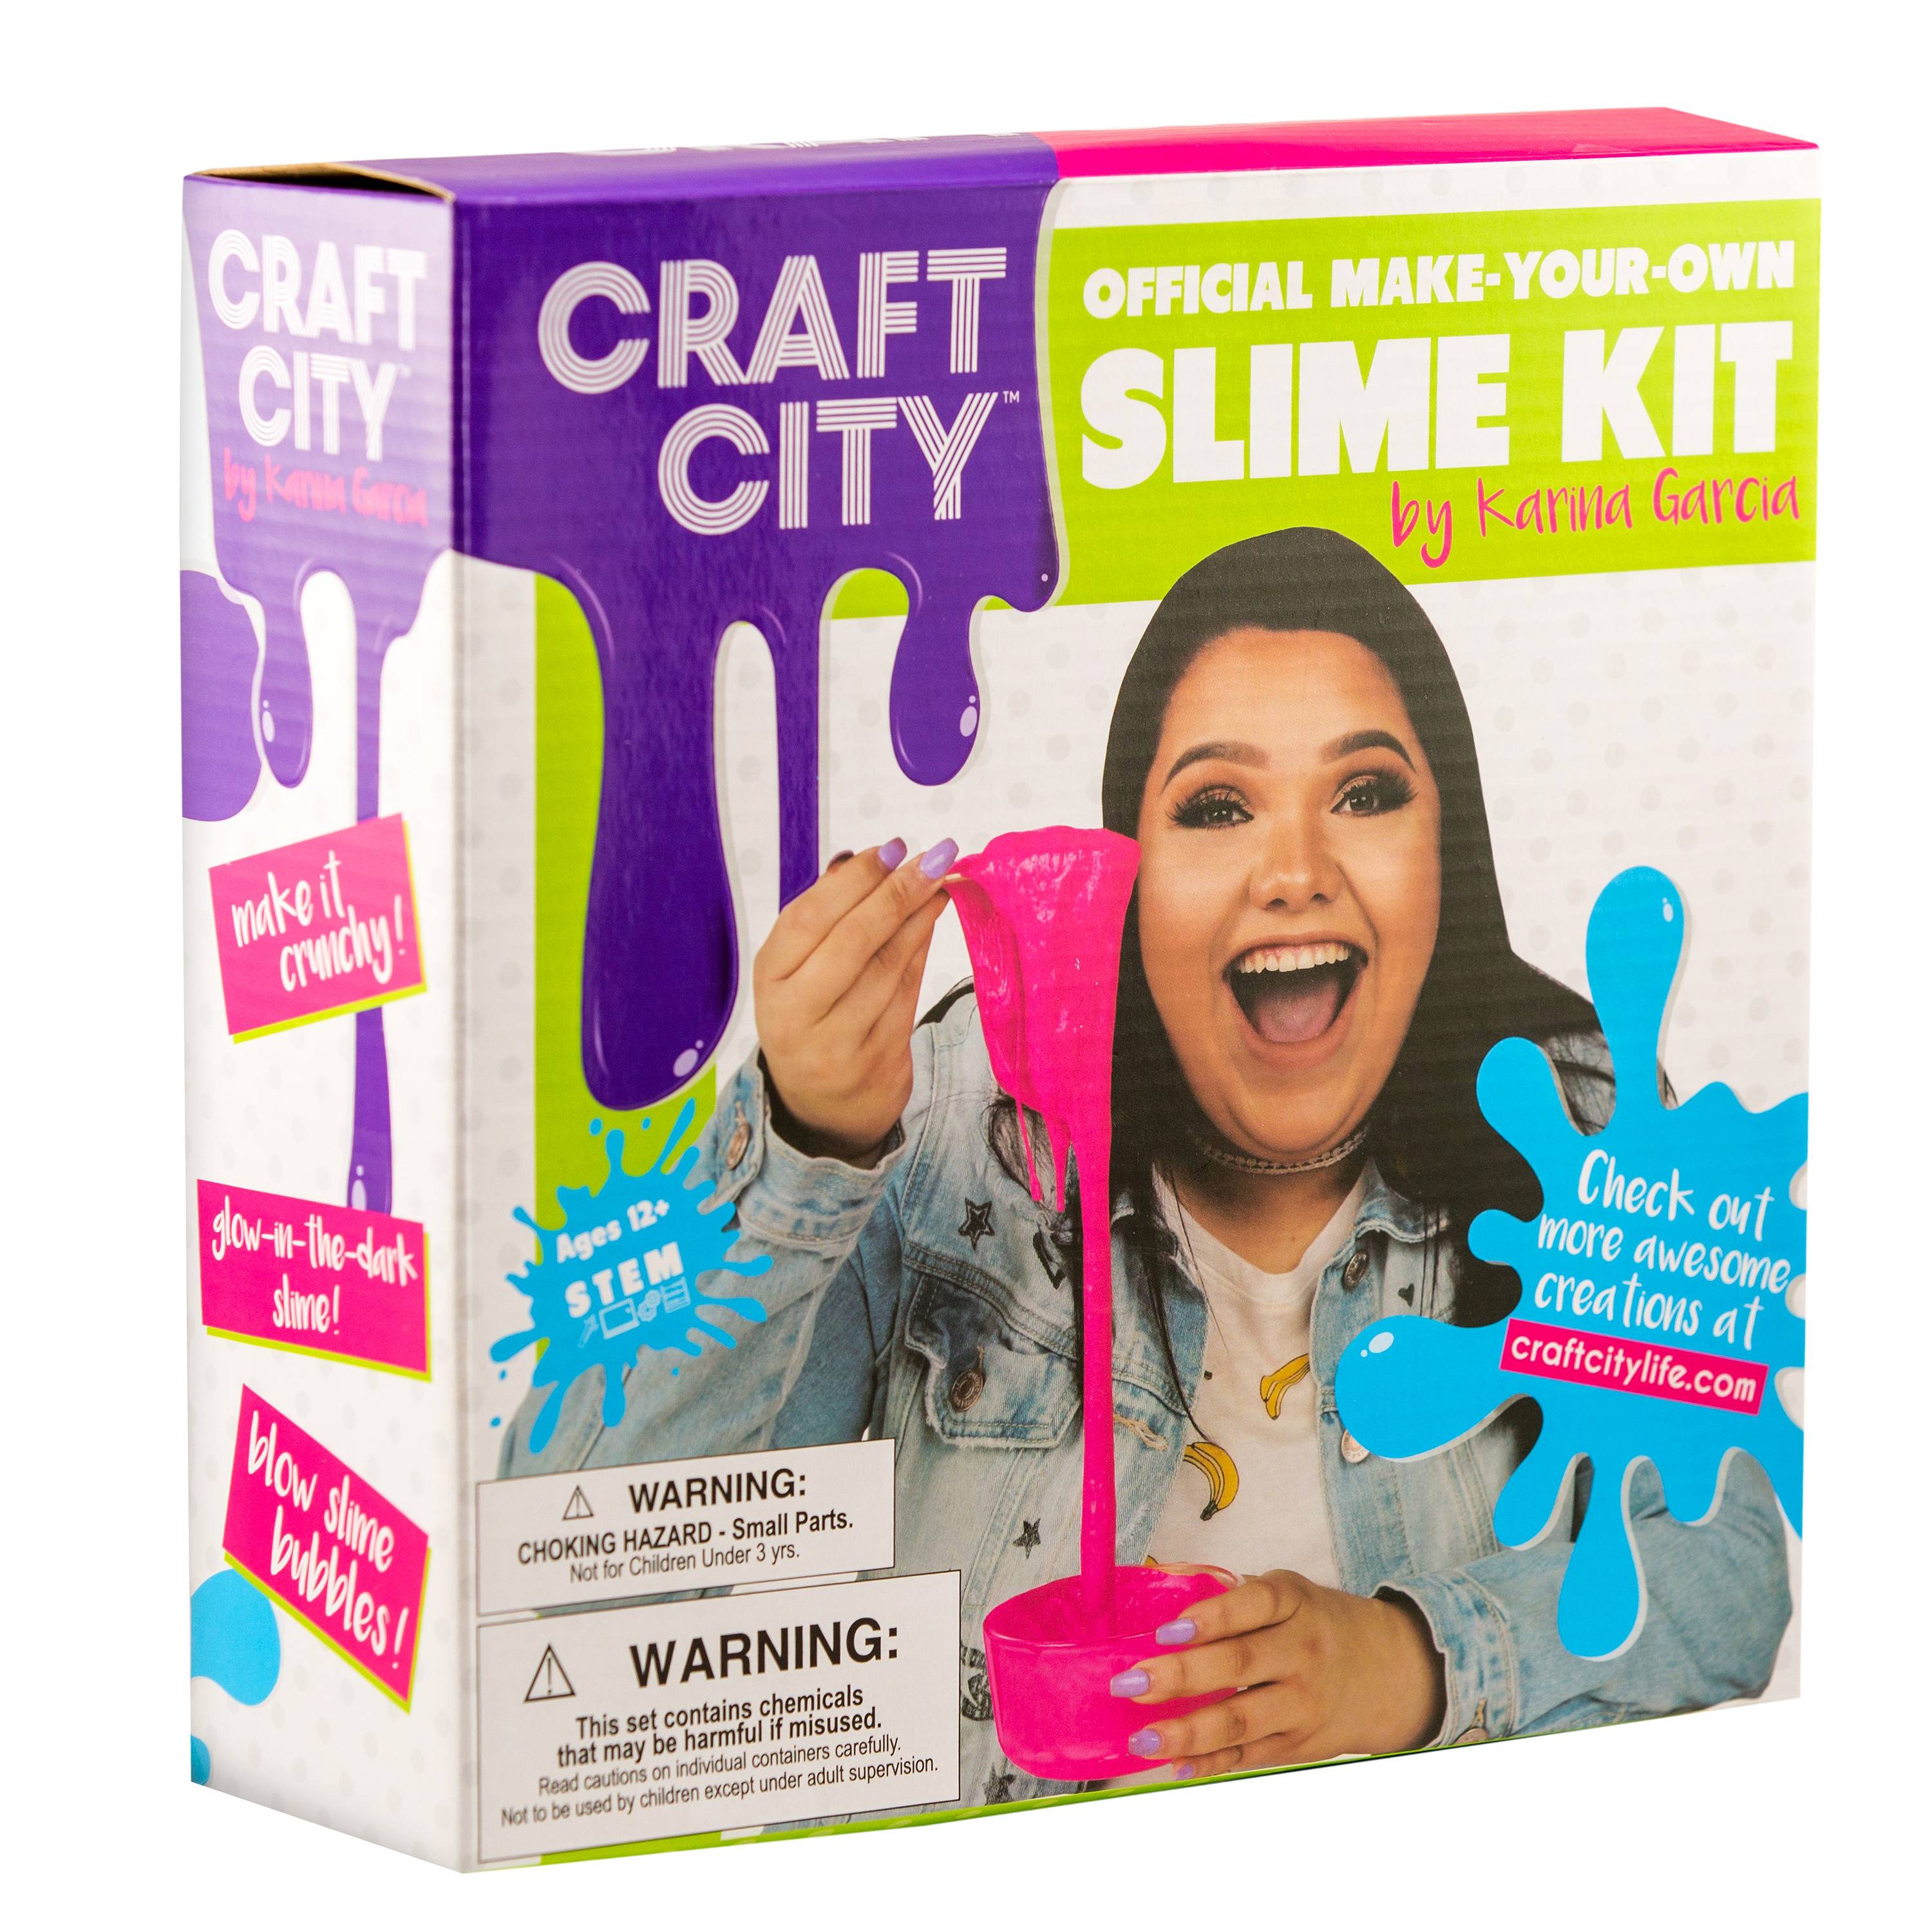 Glow in the Dark Slime Kit 4 pieces